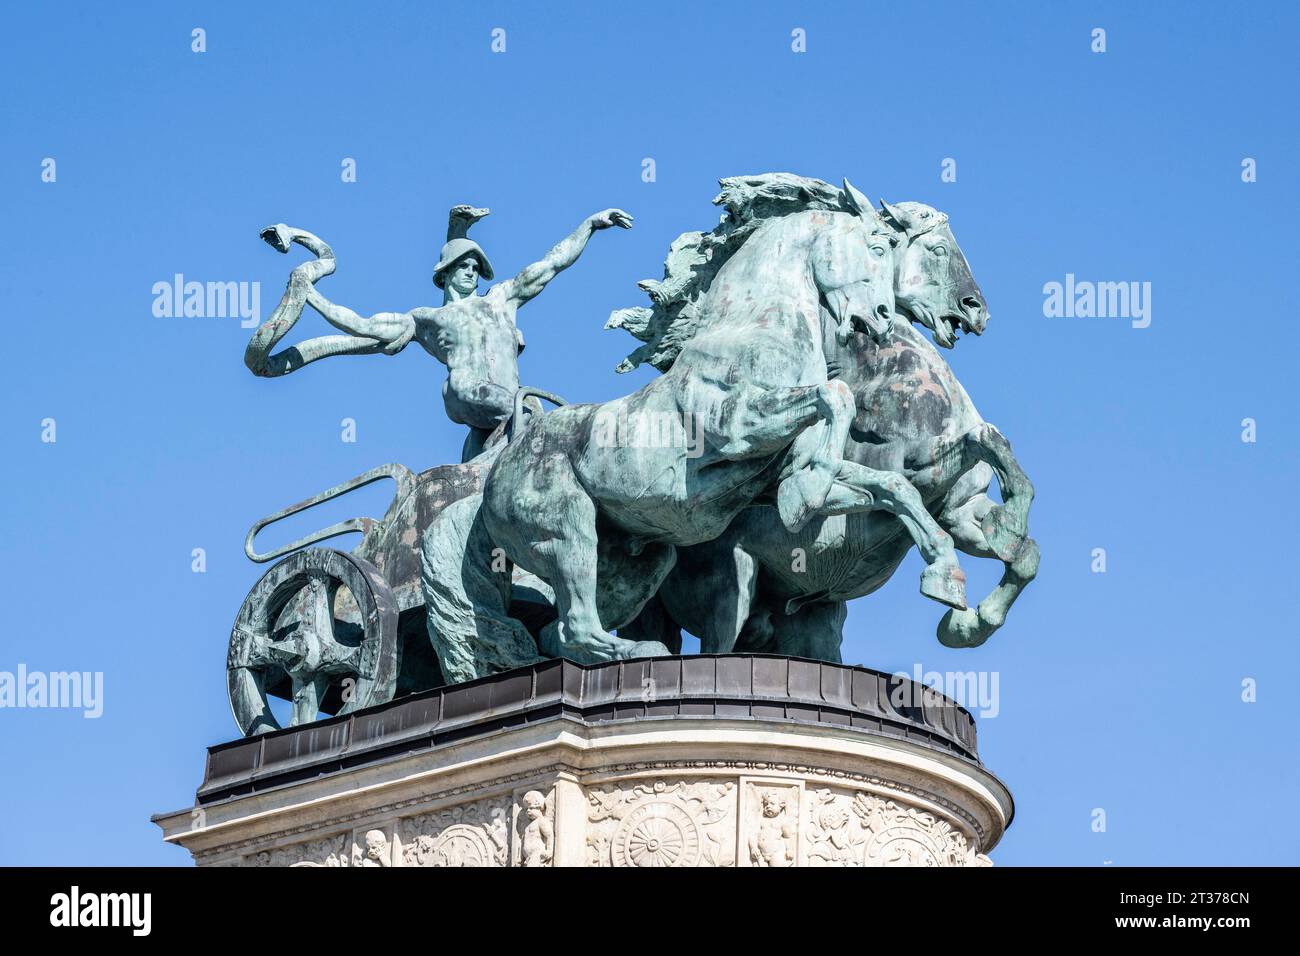 Sculpture on Heroes' Square, Budapest, Hungary Stock Photo